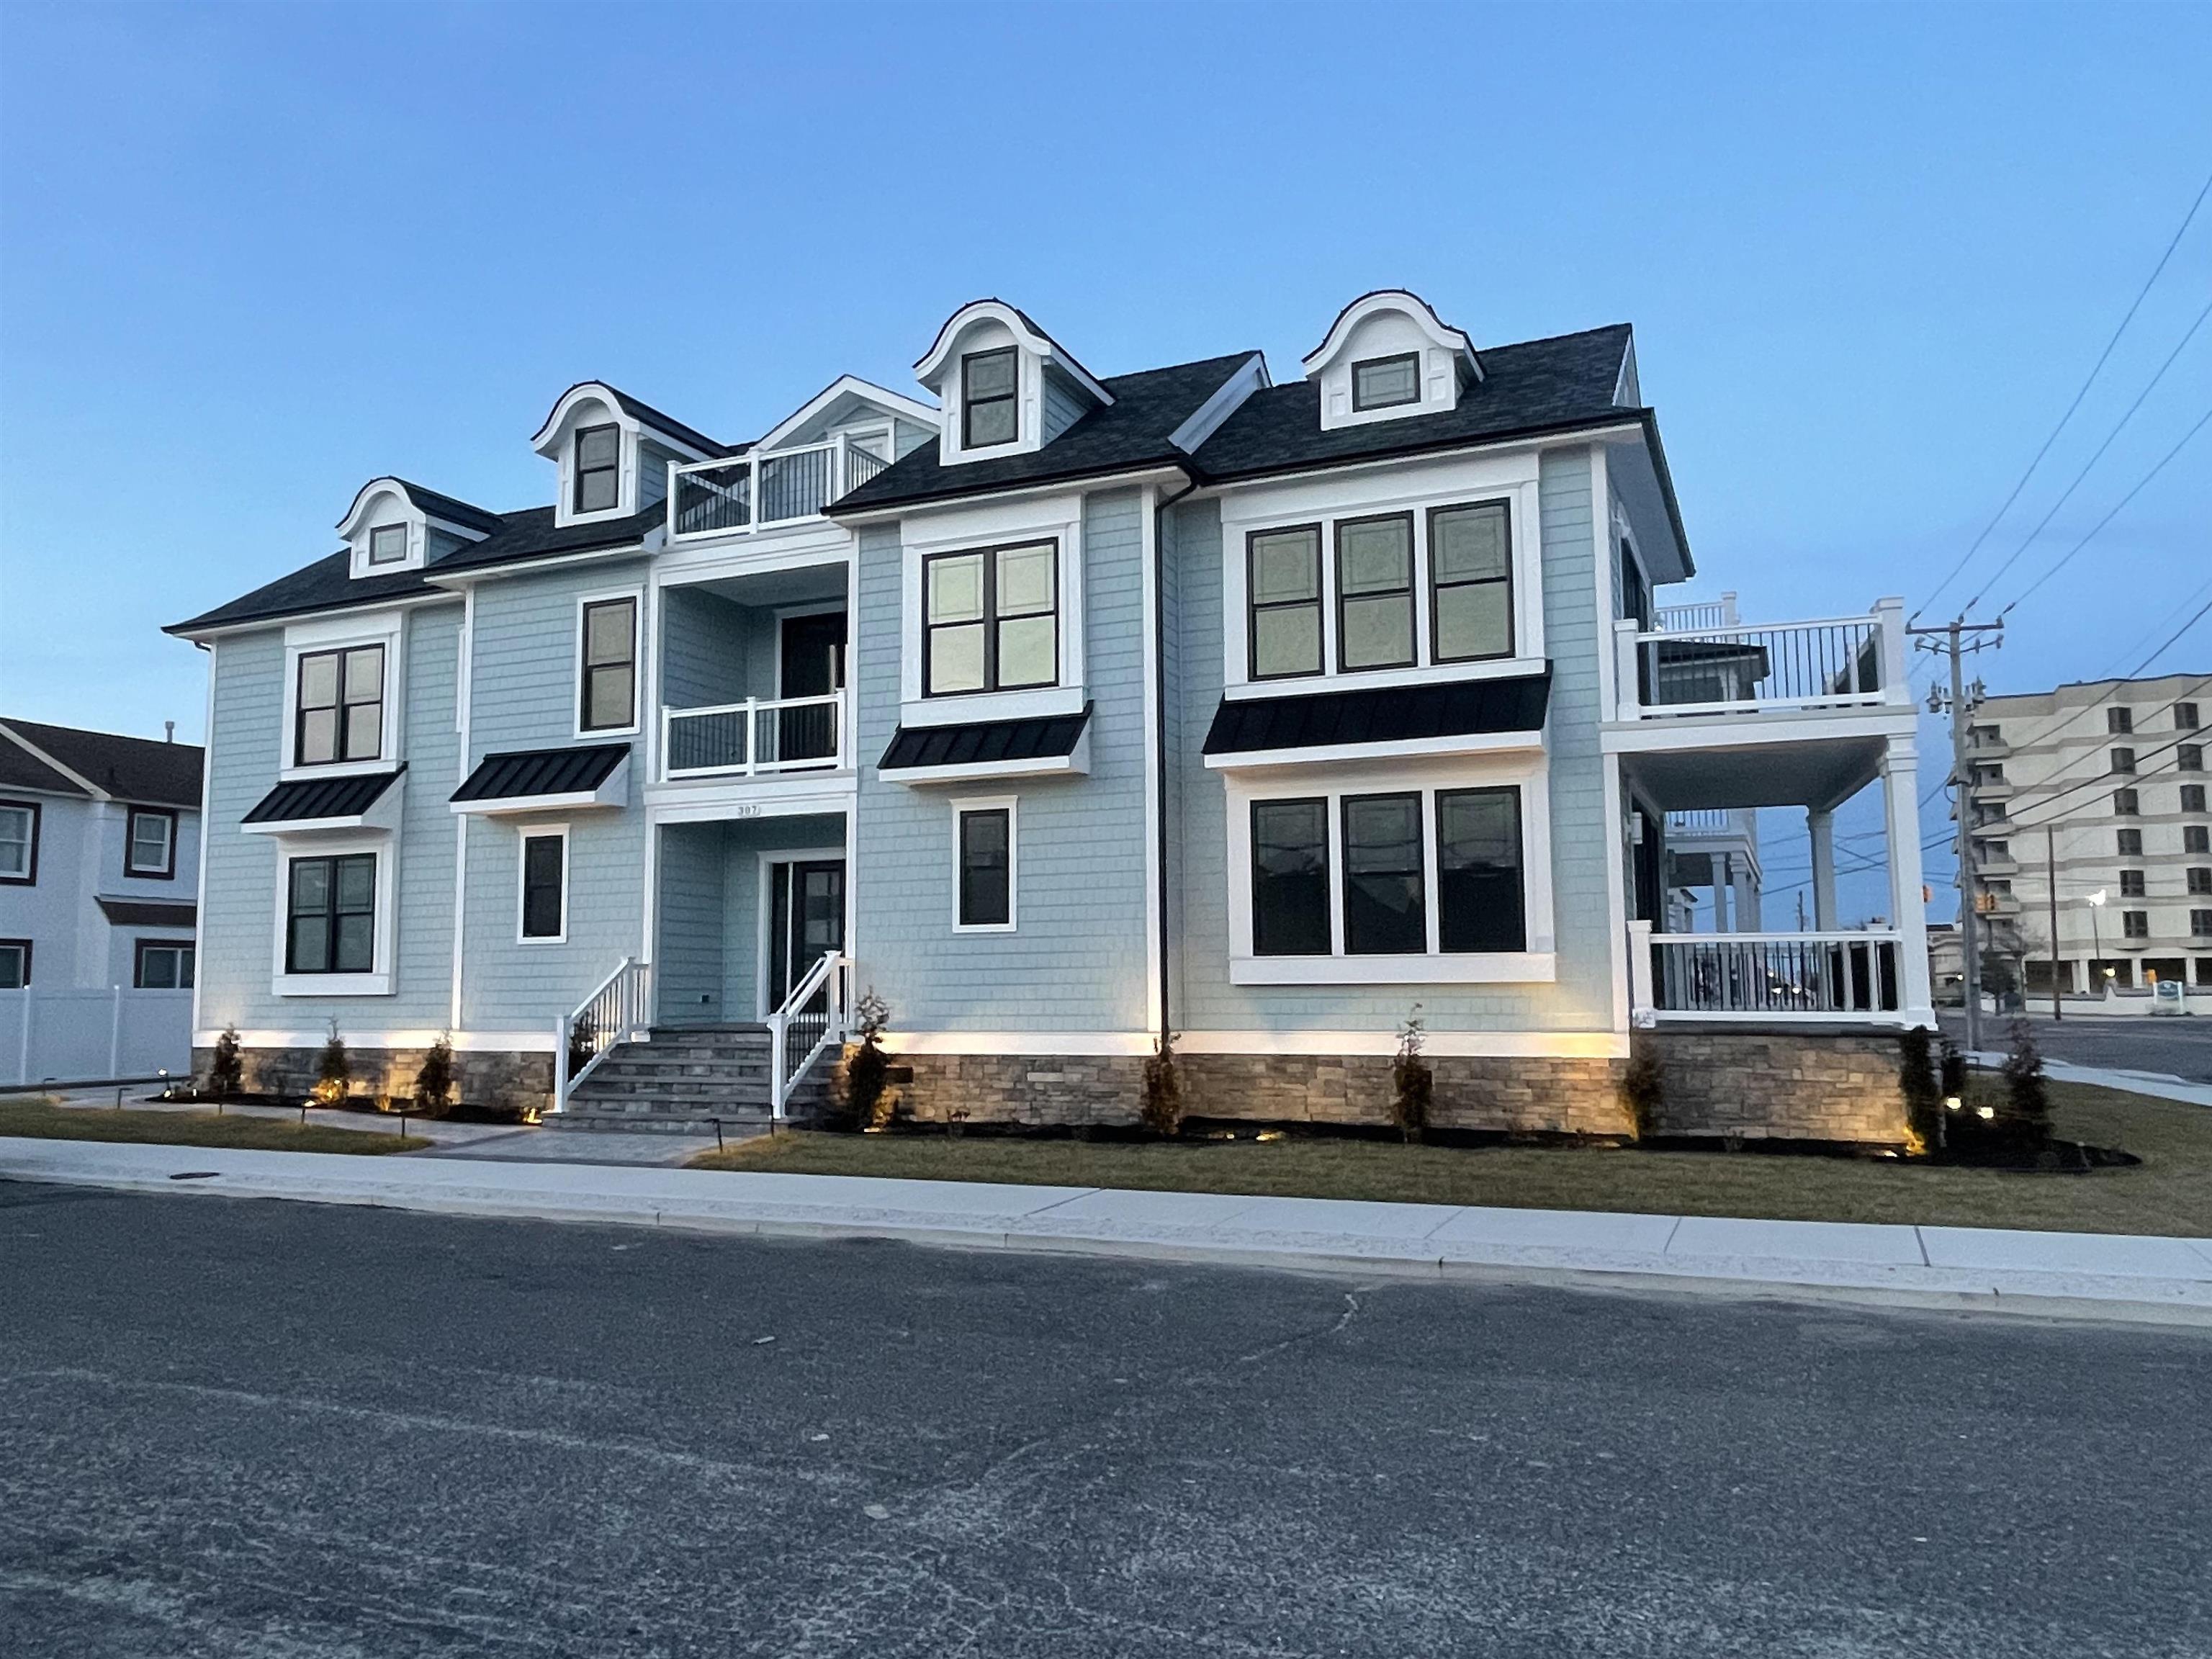 307 Orchid Road - Wildwood Crest